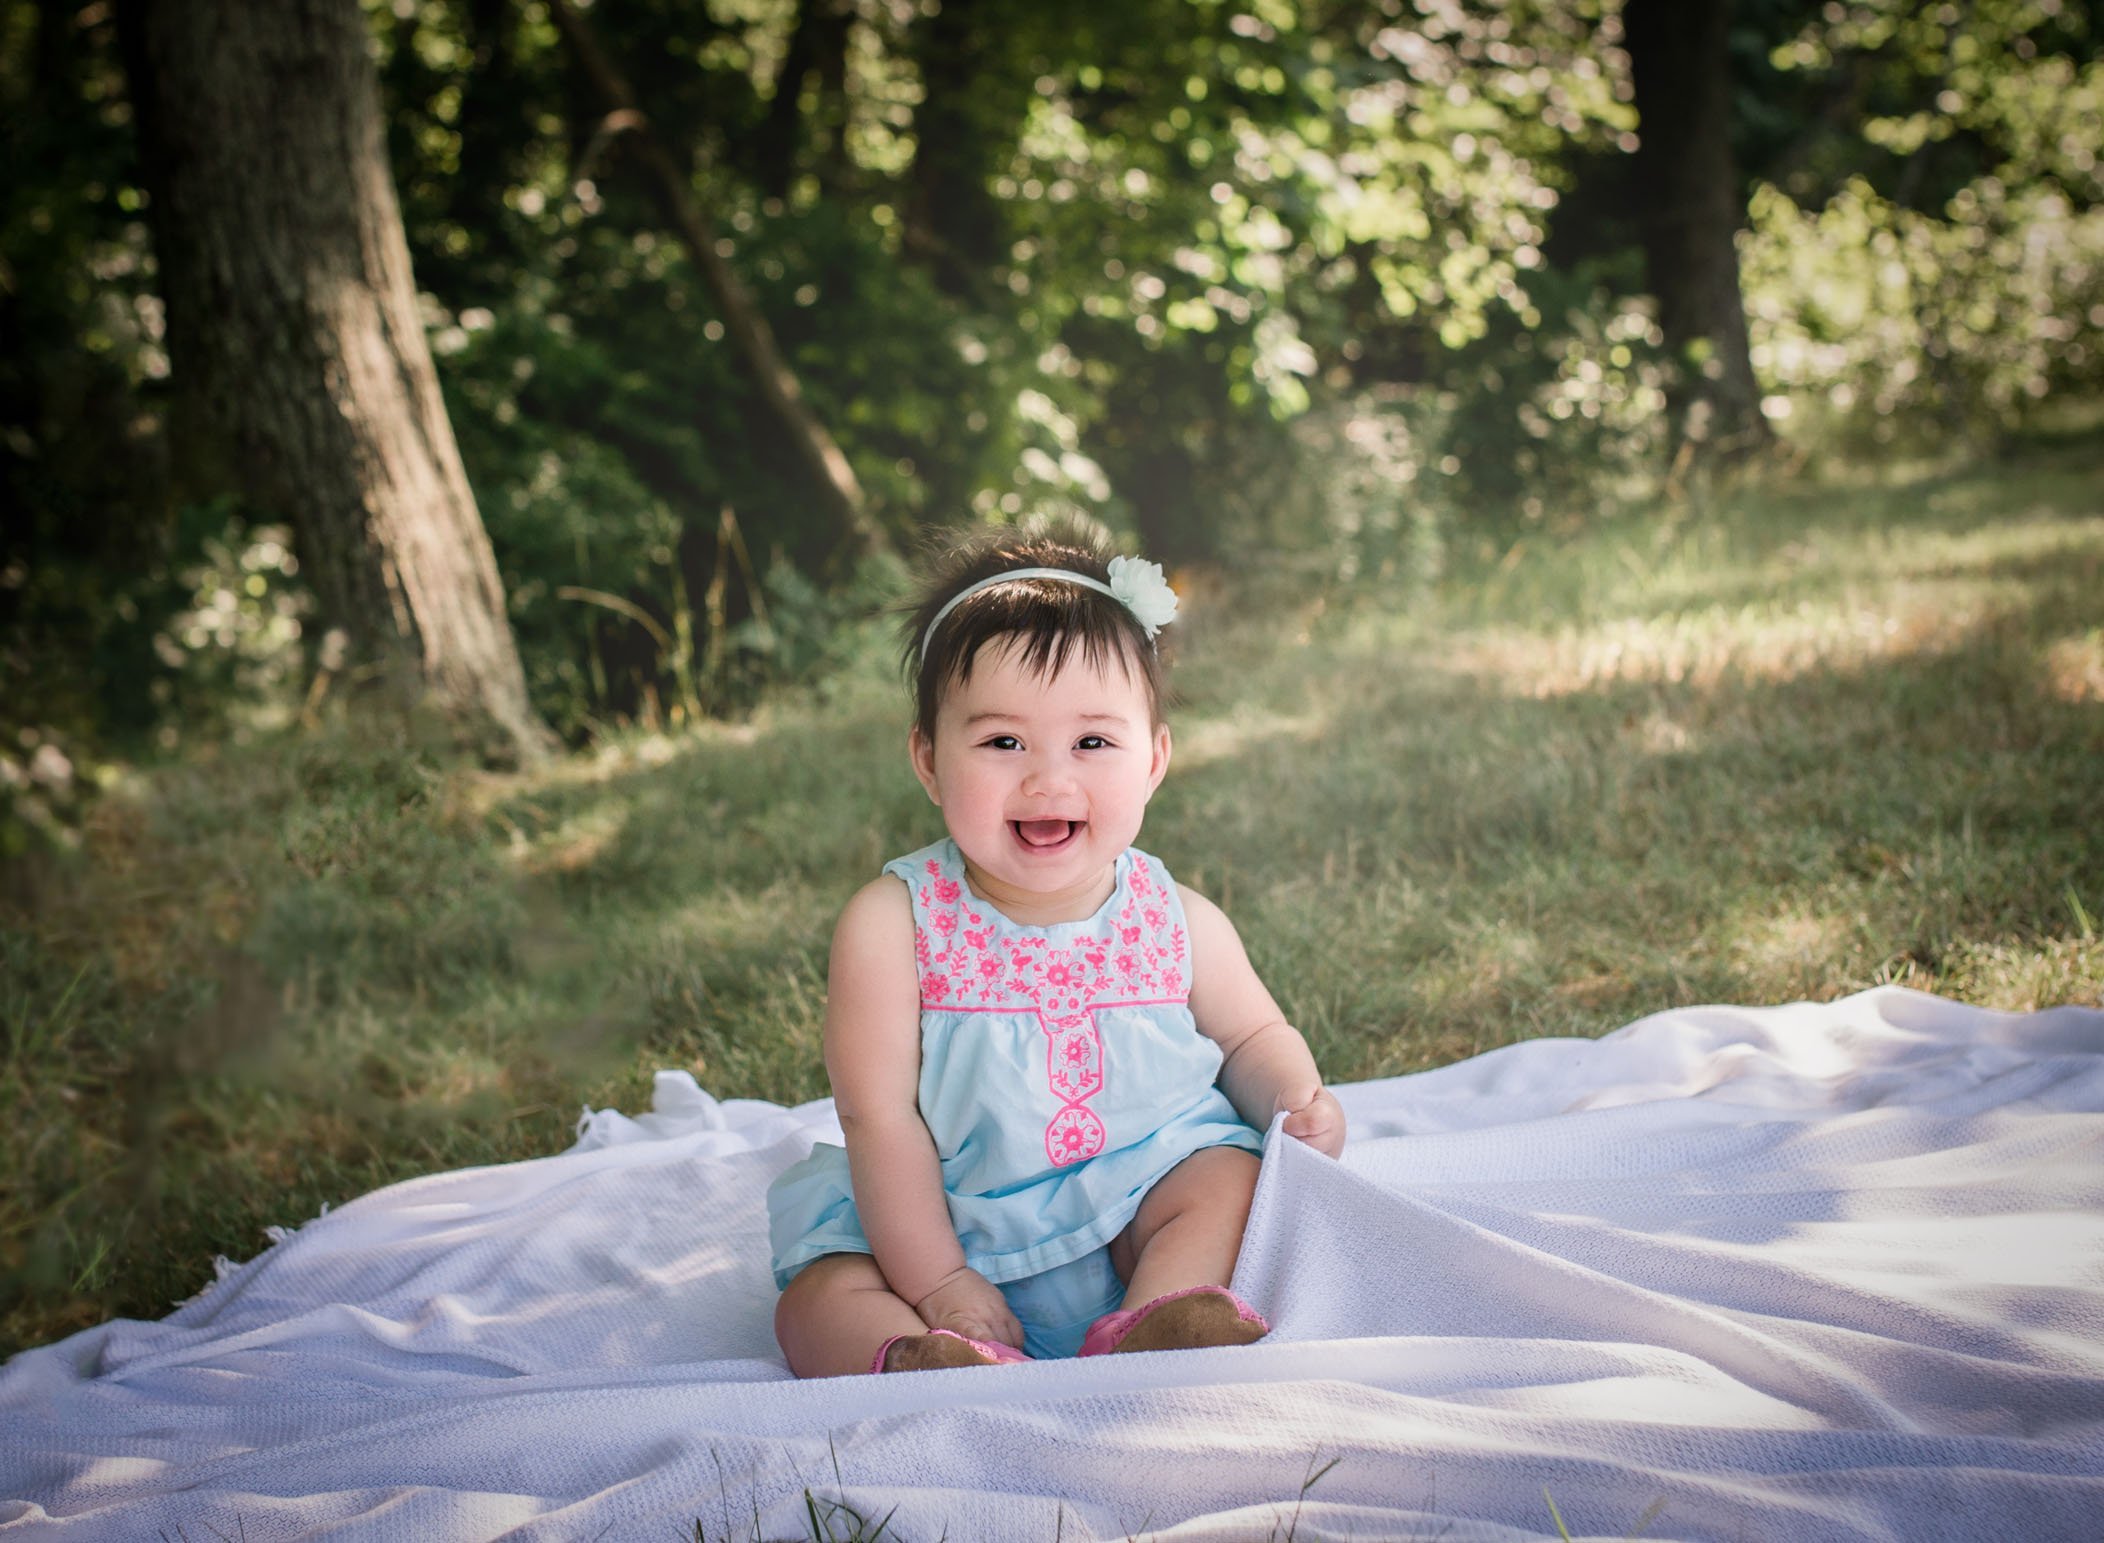 6 month old baby girl smiling outside sitting on a blanket in the grass